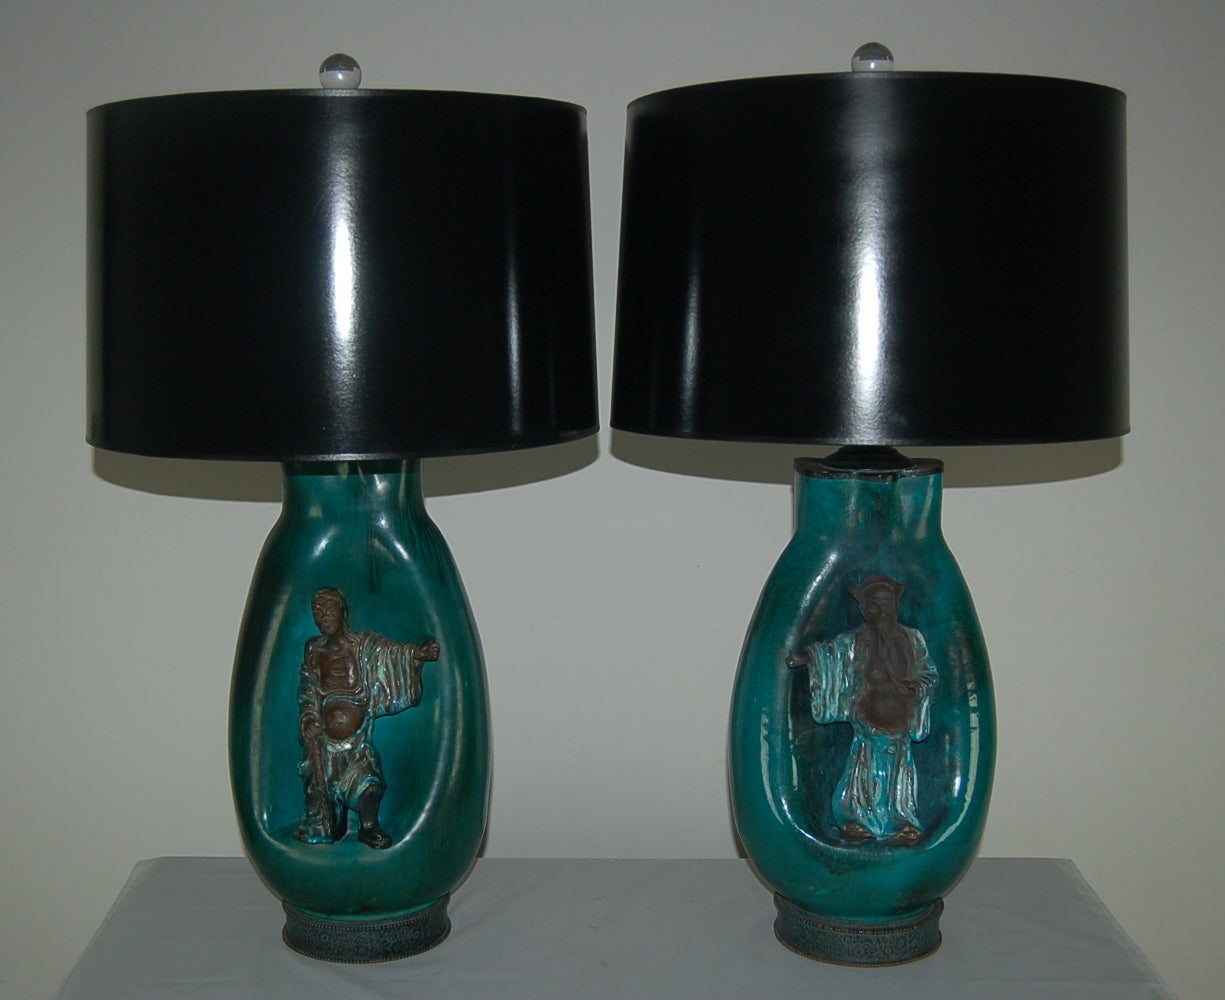 From the Chinese Scholar series by Marcello Fantoni, a matched pair of  rectangular table lamps - absolutely stunning and in mint condition. Each is hand-painted, with incredible detailing to the figure. Signed by the artist. 

They stand 25 inches